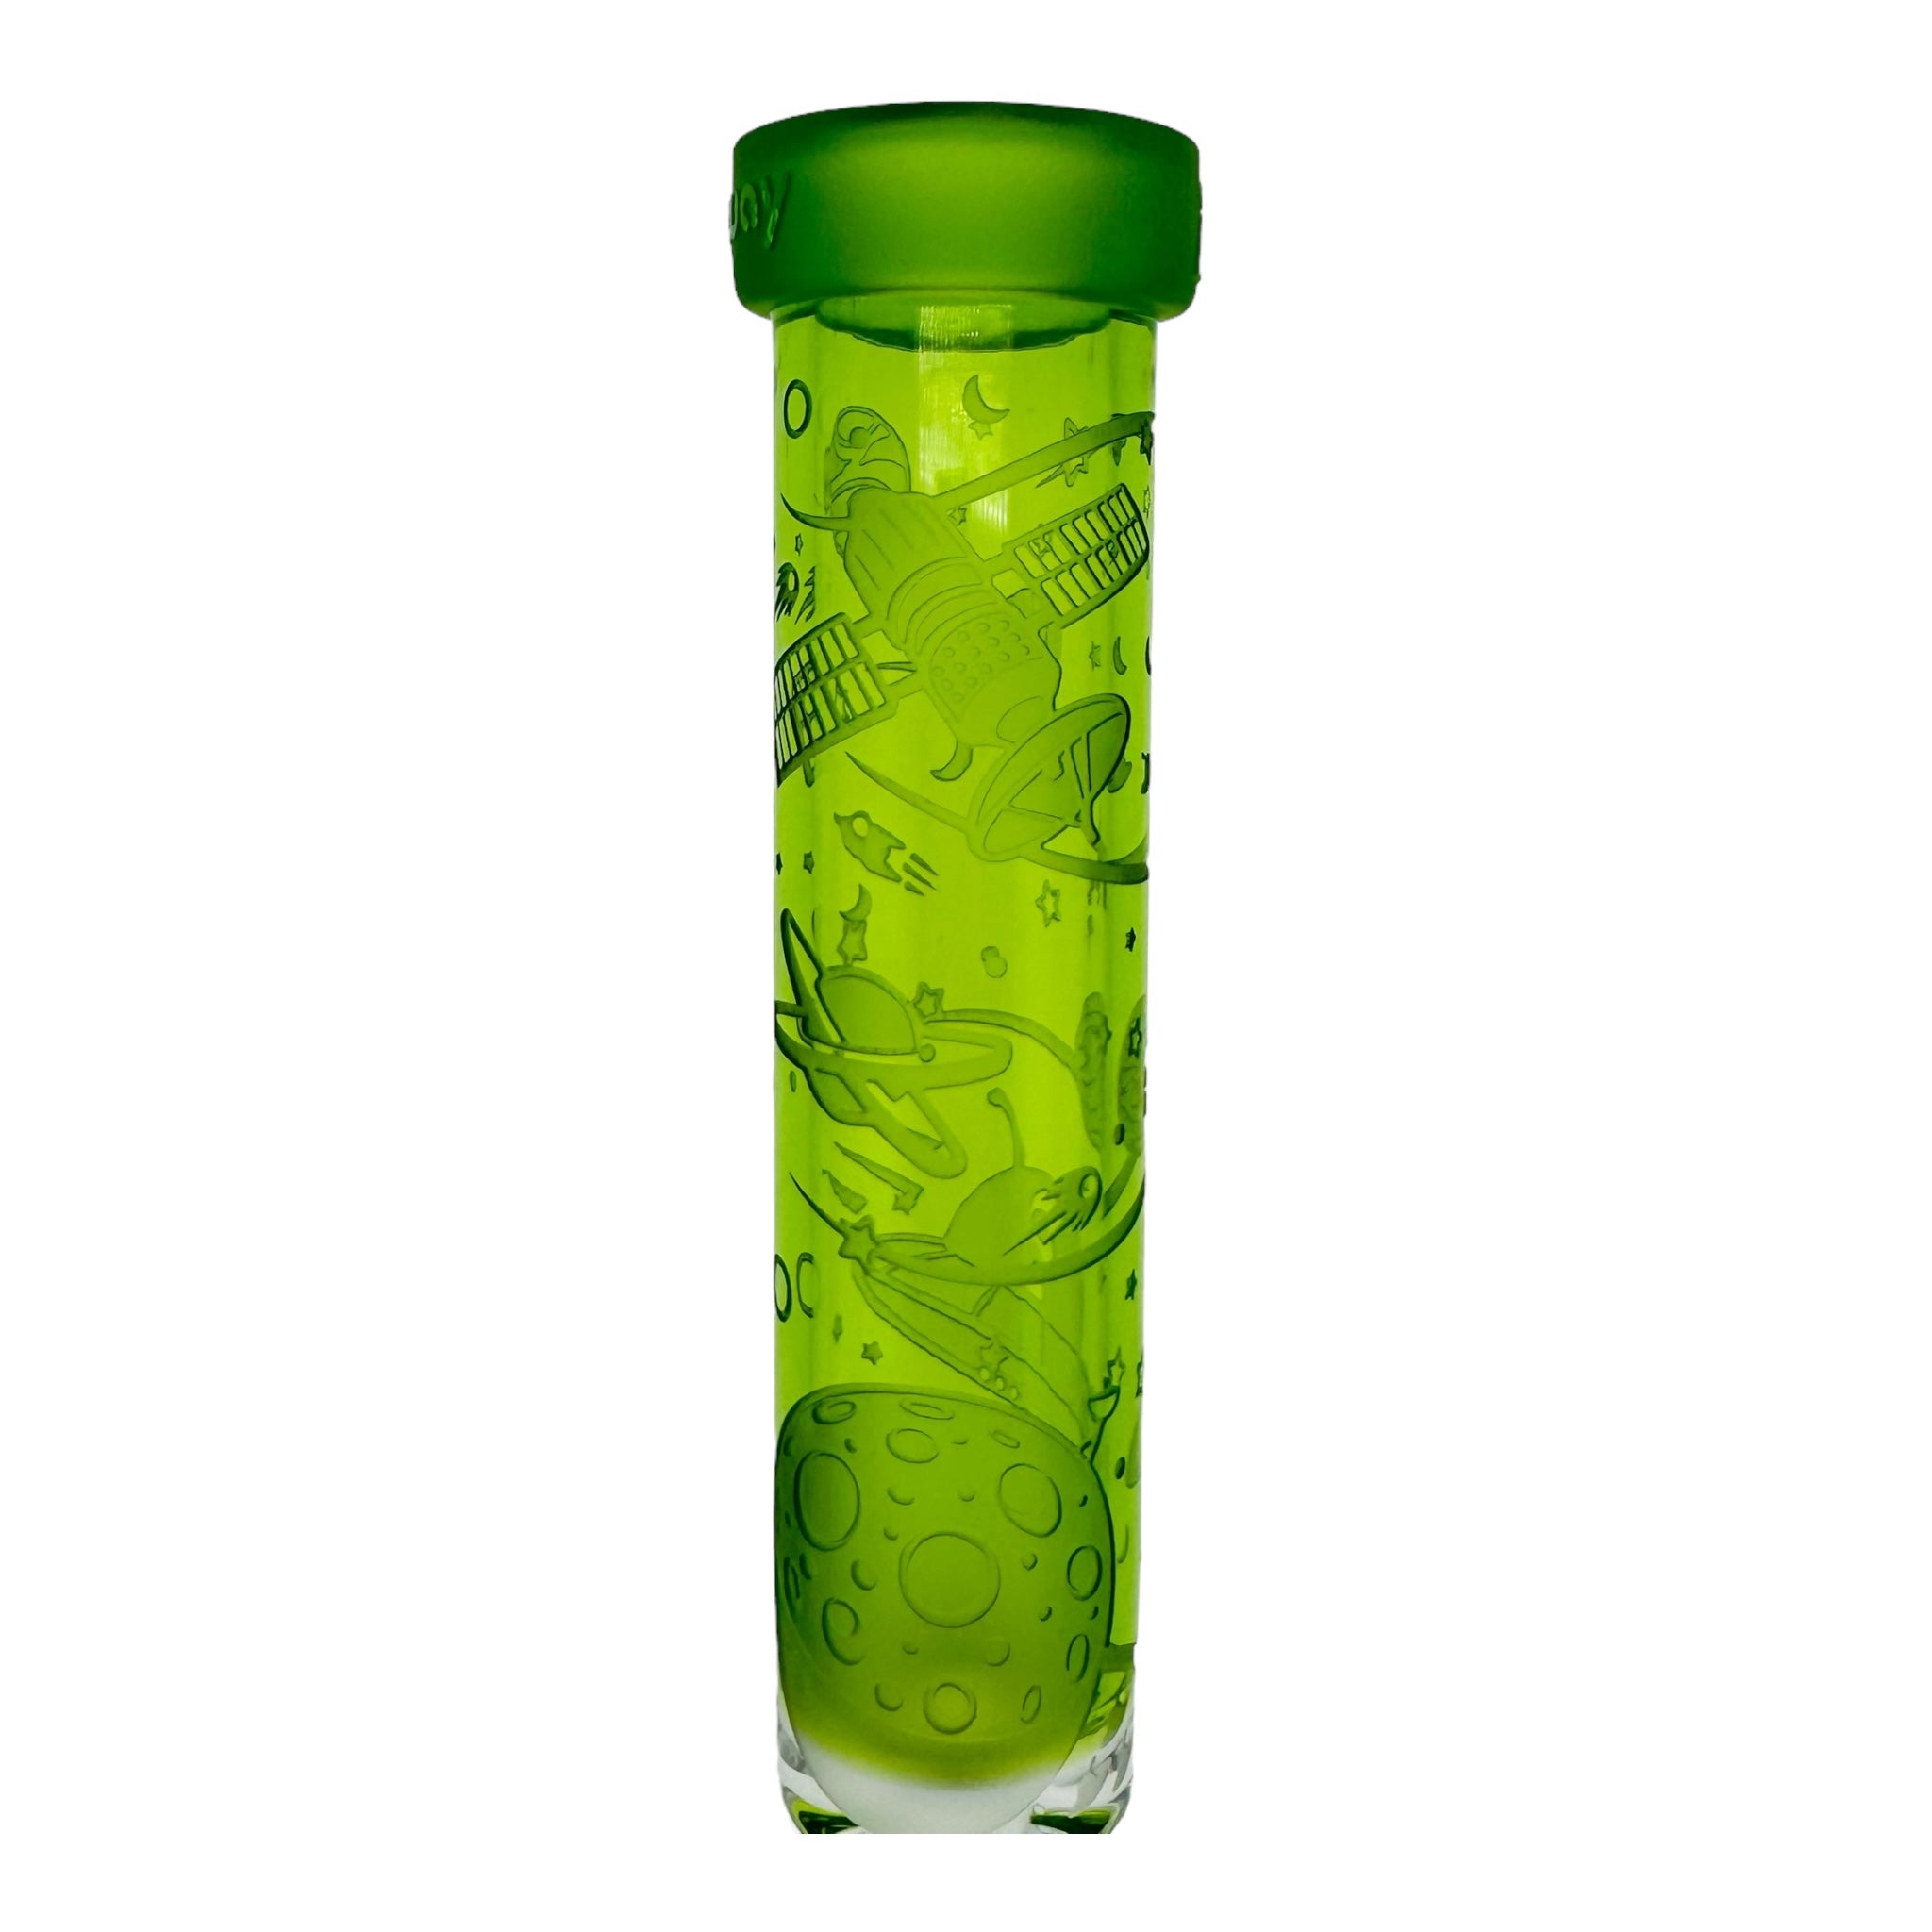 Milkyway Glass - Space Odyssey In 3D 11″ Beaker Bong With Collins Perc Green